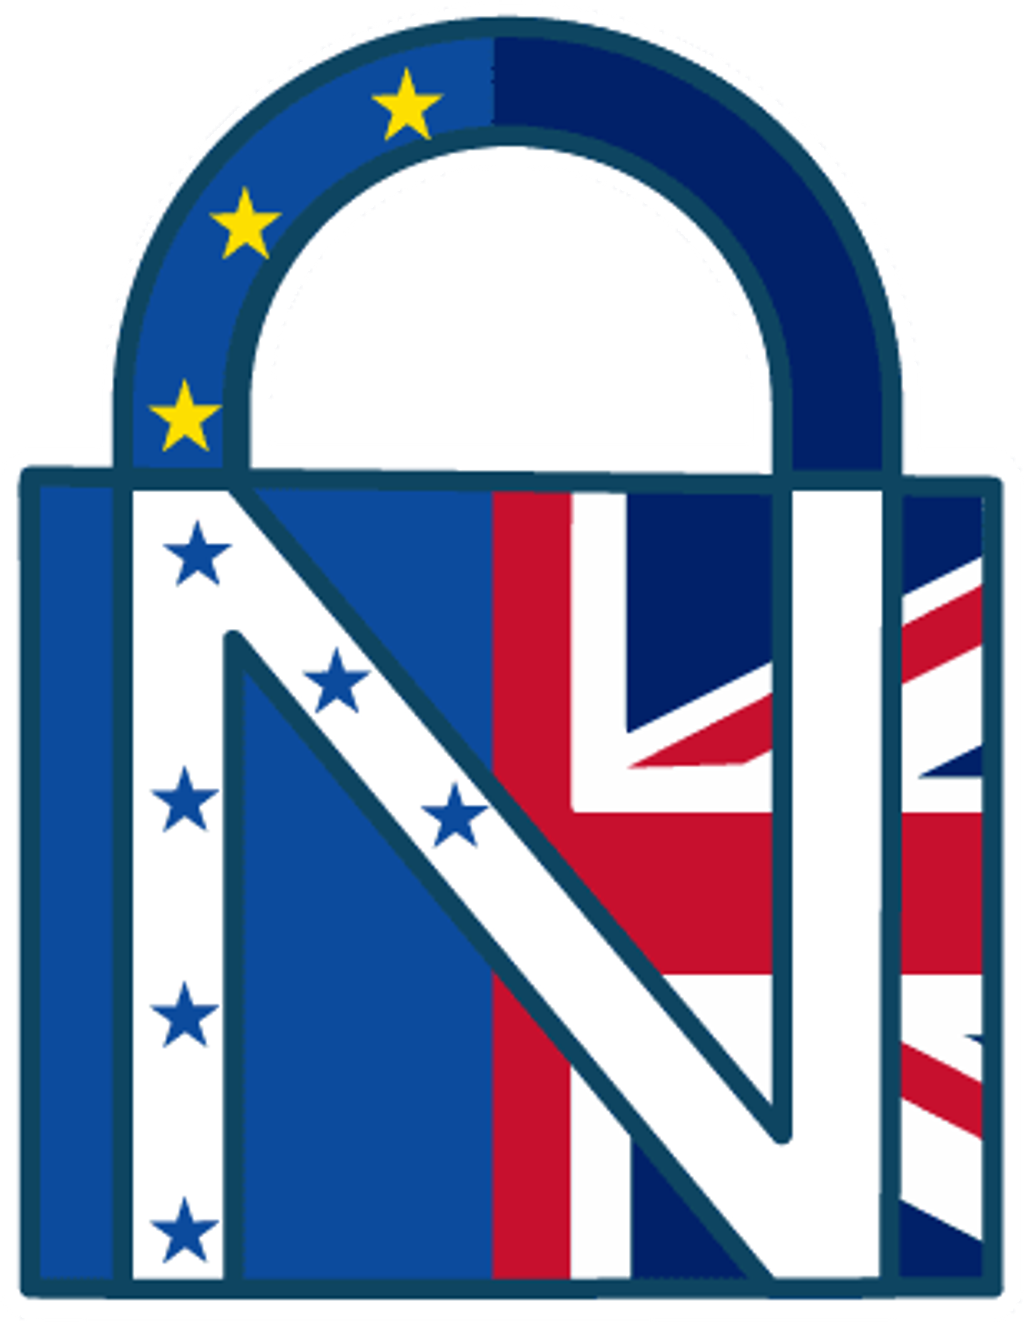 Logo in the shape of a lock representing Prighter's EU & UK NIS representation services.